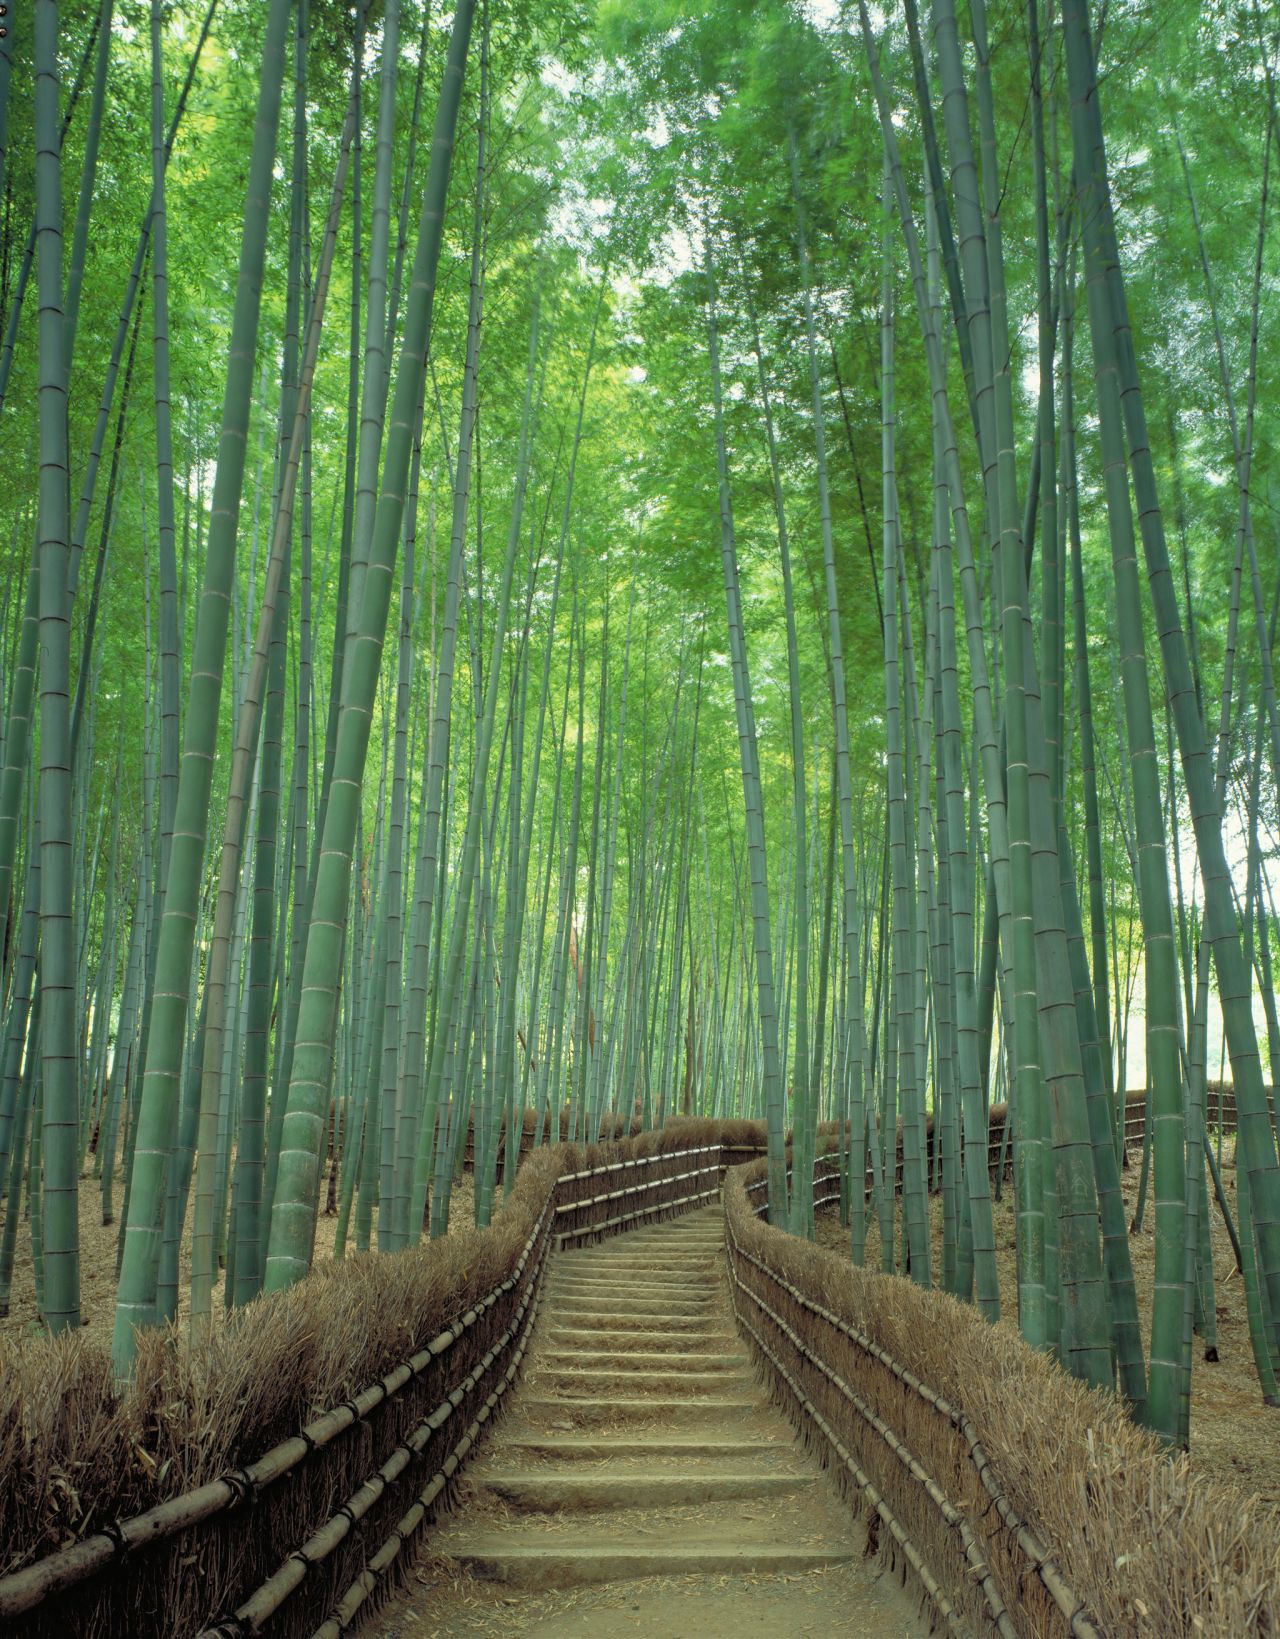 Kyoto's Sagano Bamboo Forest is considered one of the world's most beautiful forests. Not hard to see why.